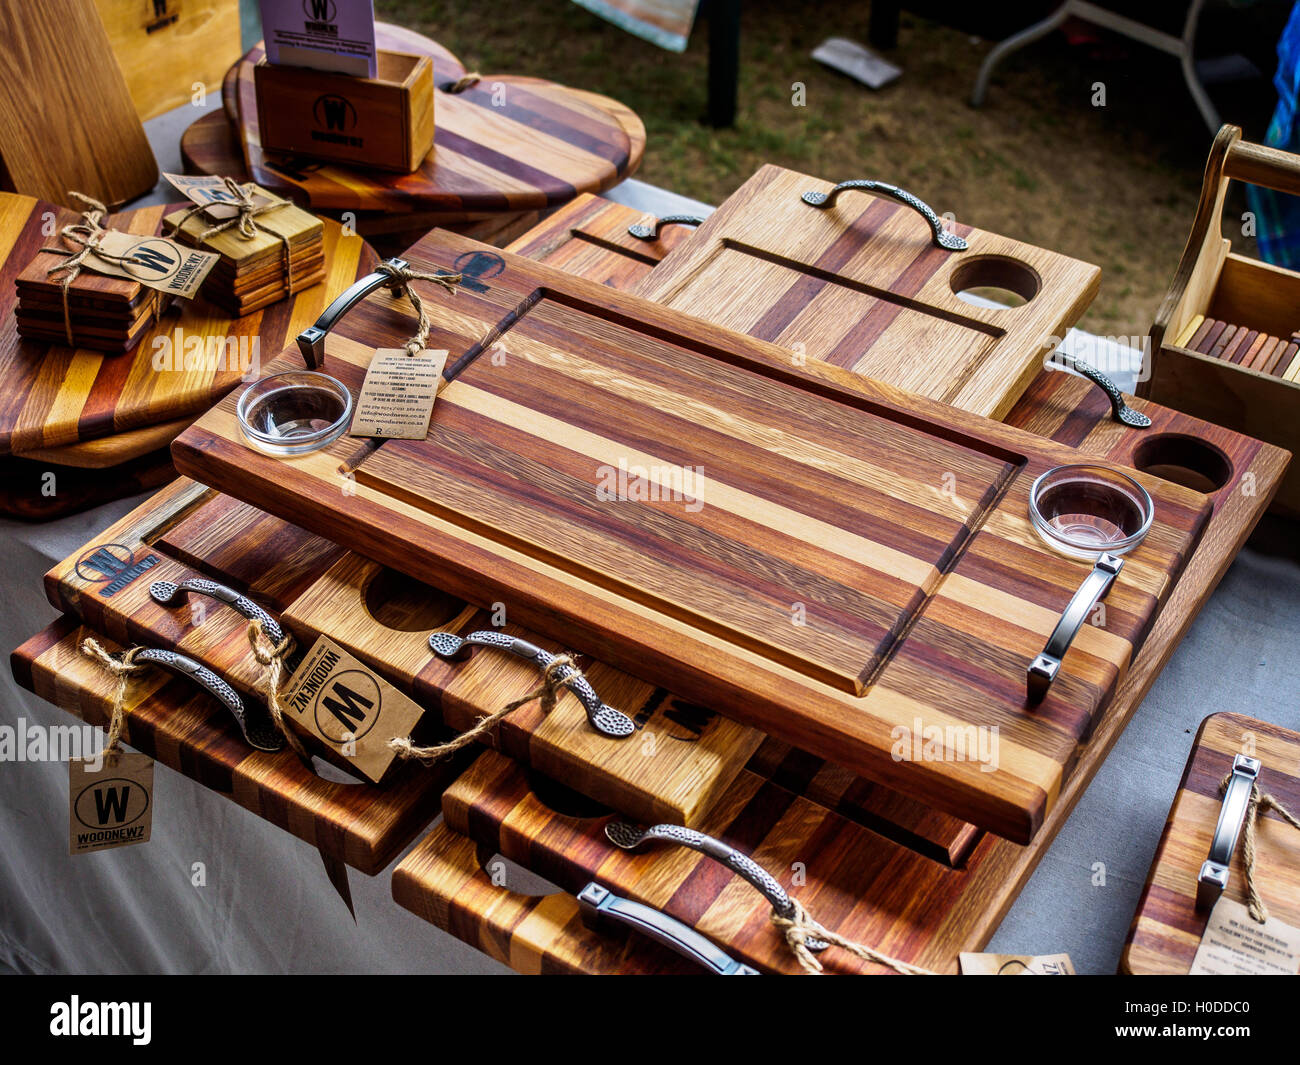 Handmade wooden items on sale at a market stall Stock Photo